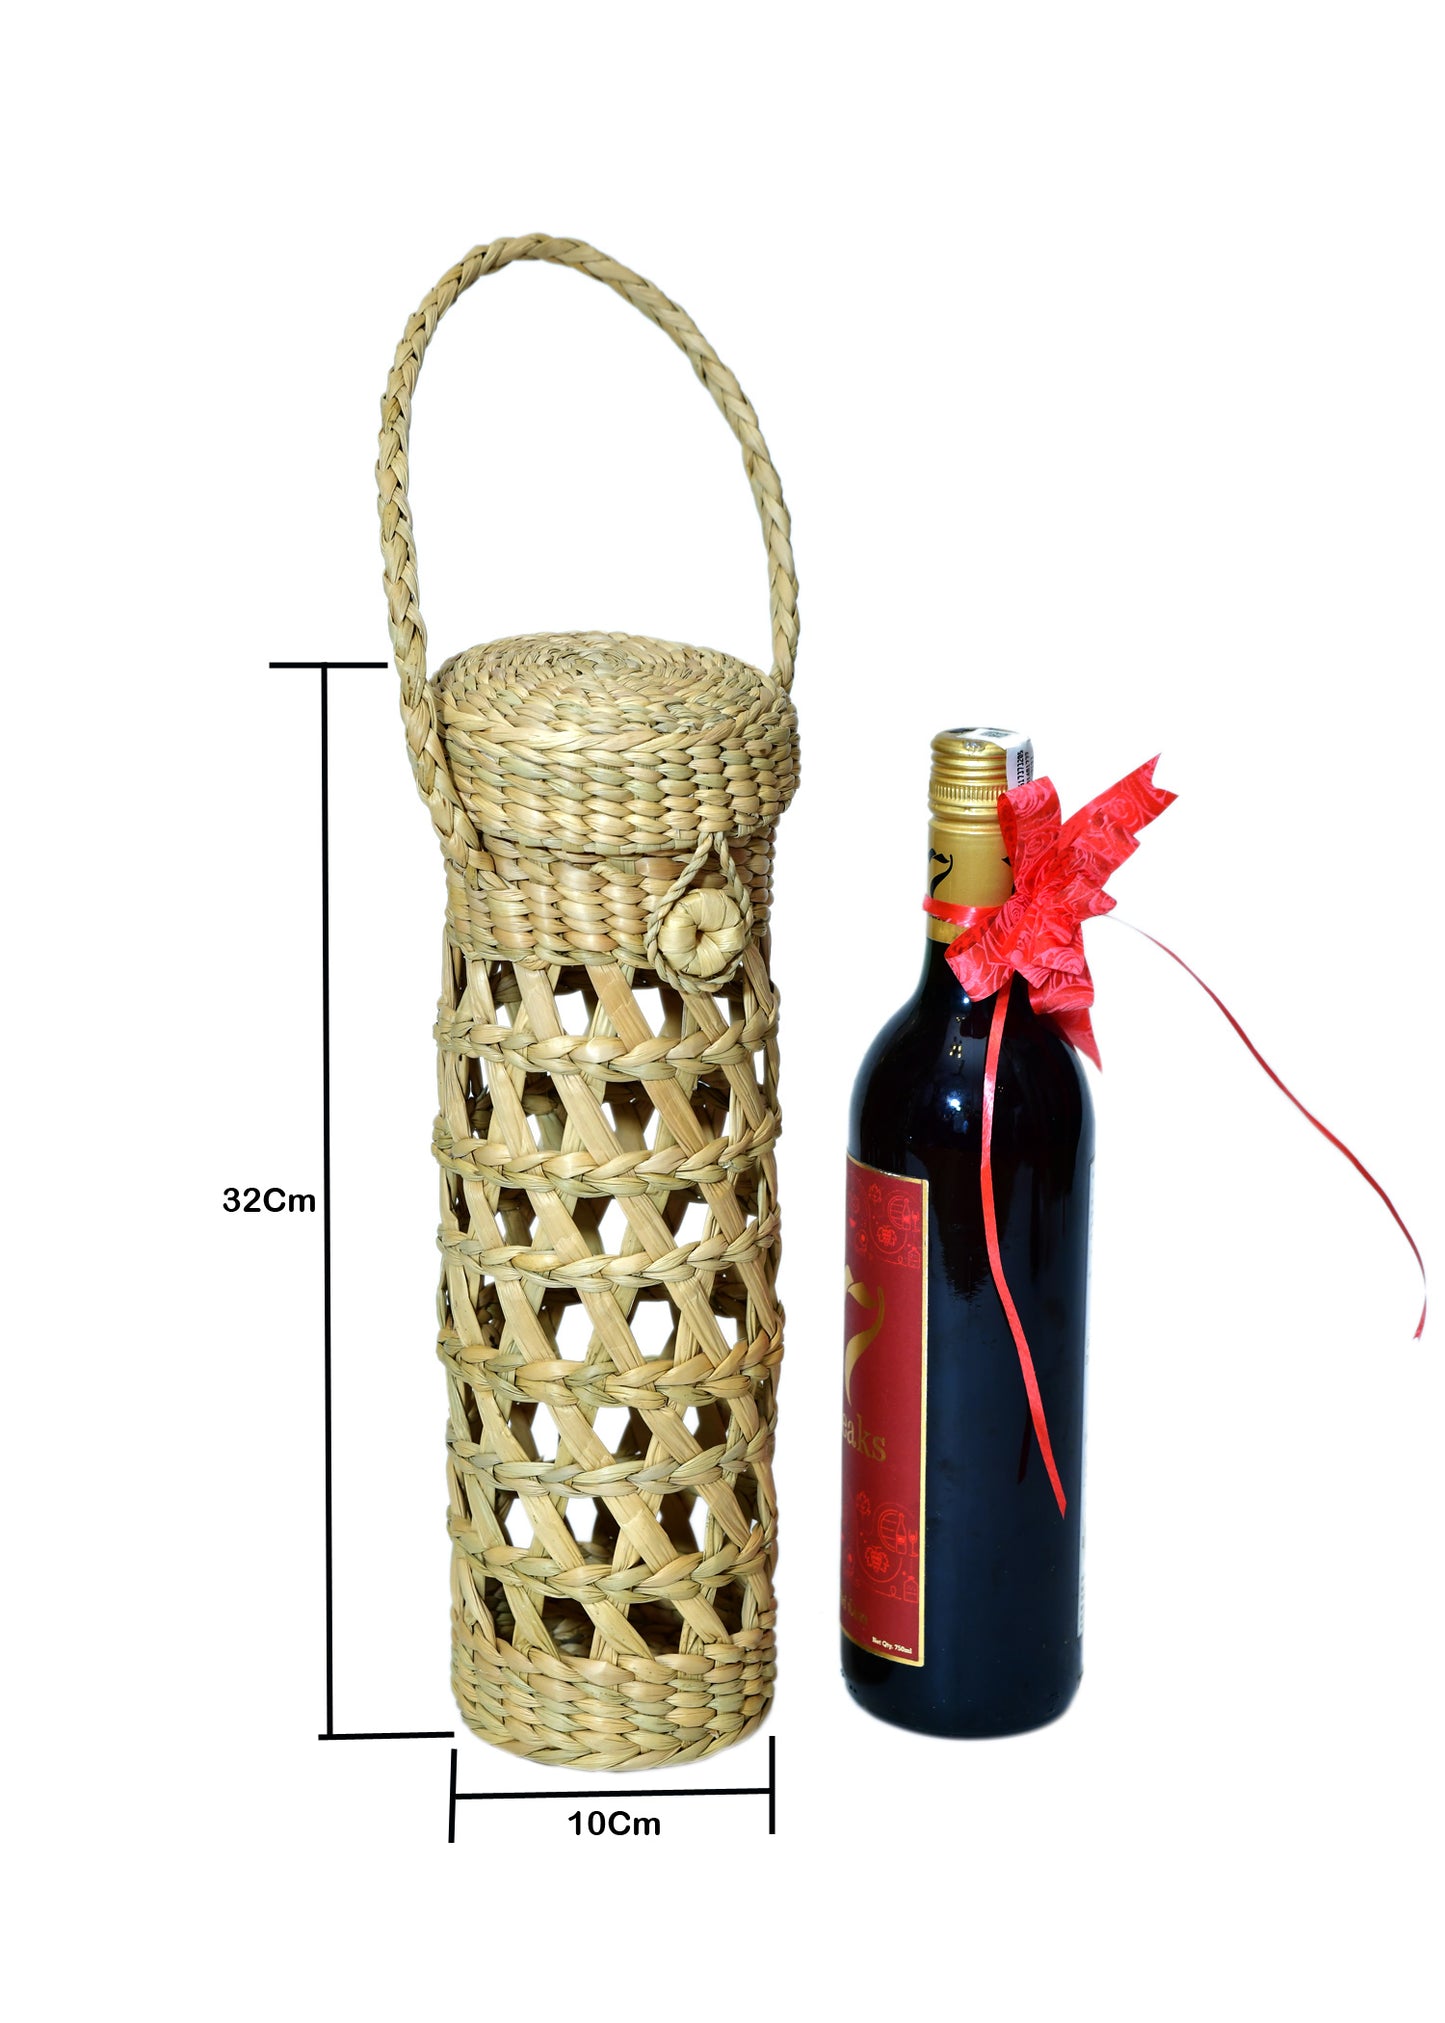 The Weaver’s Nest Handcrafted Kauna Grass Wine Bottle Cover for Gifting